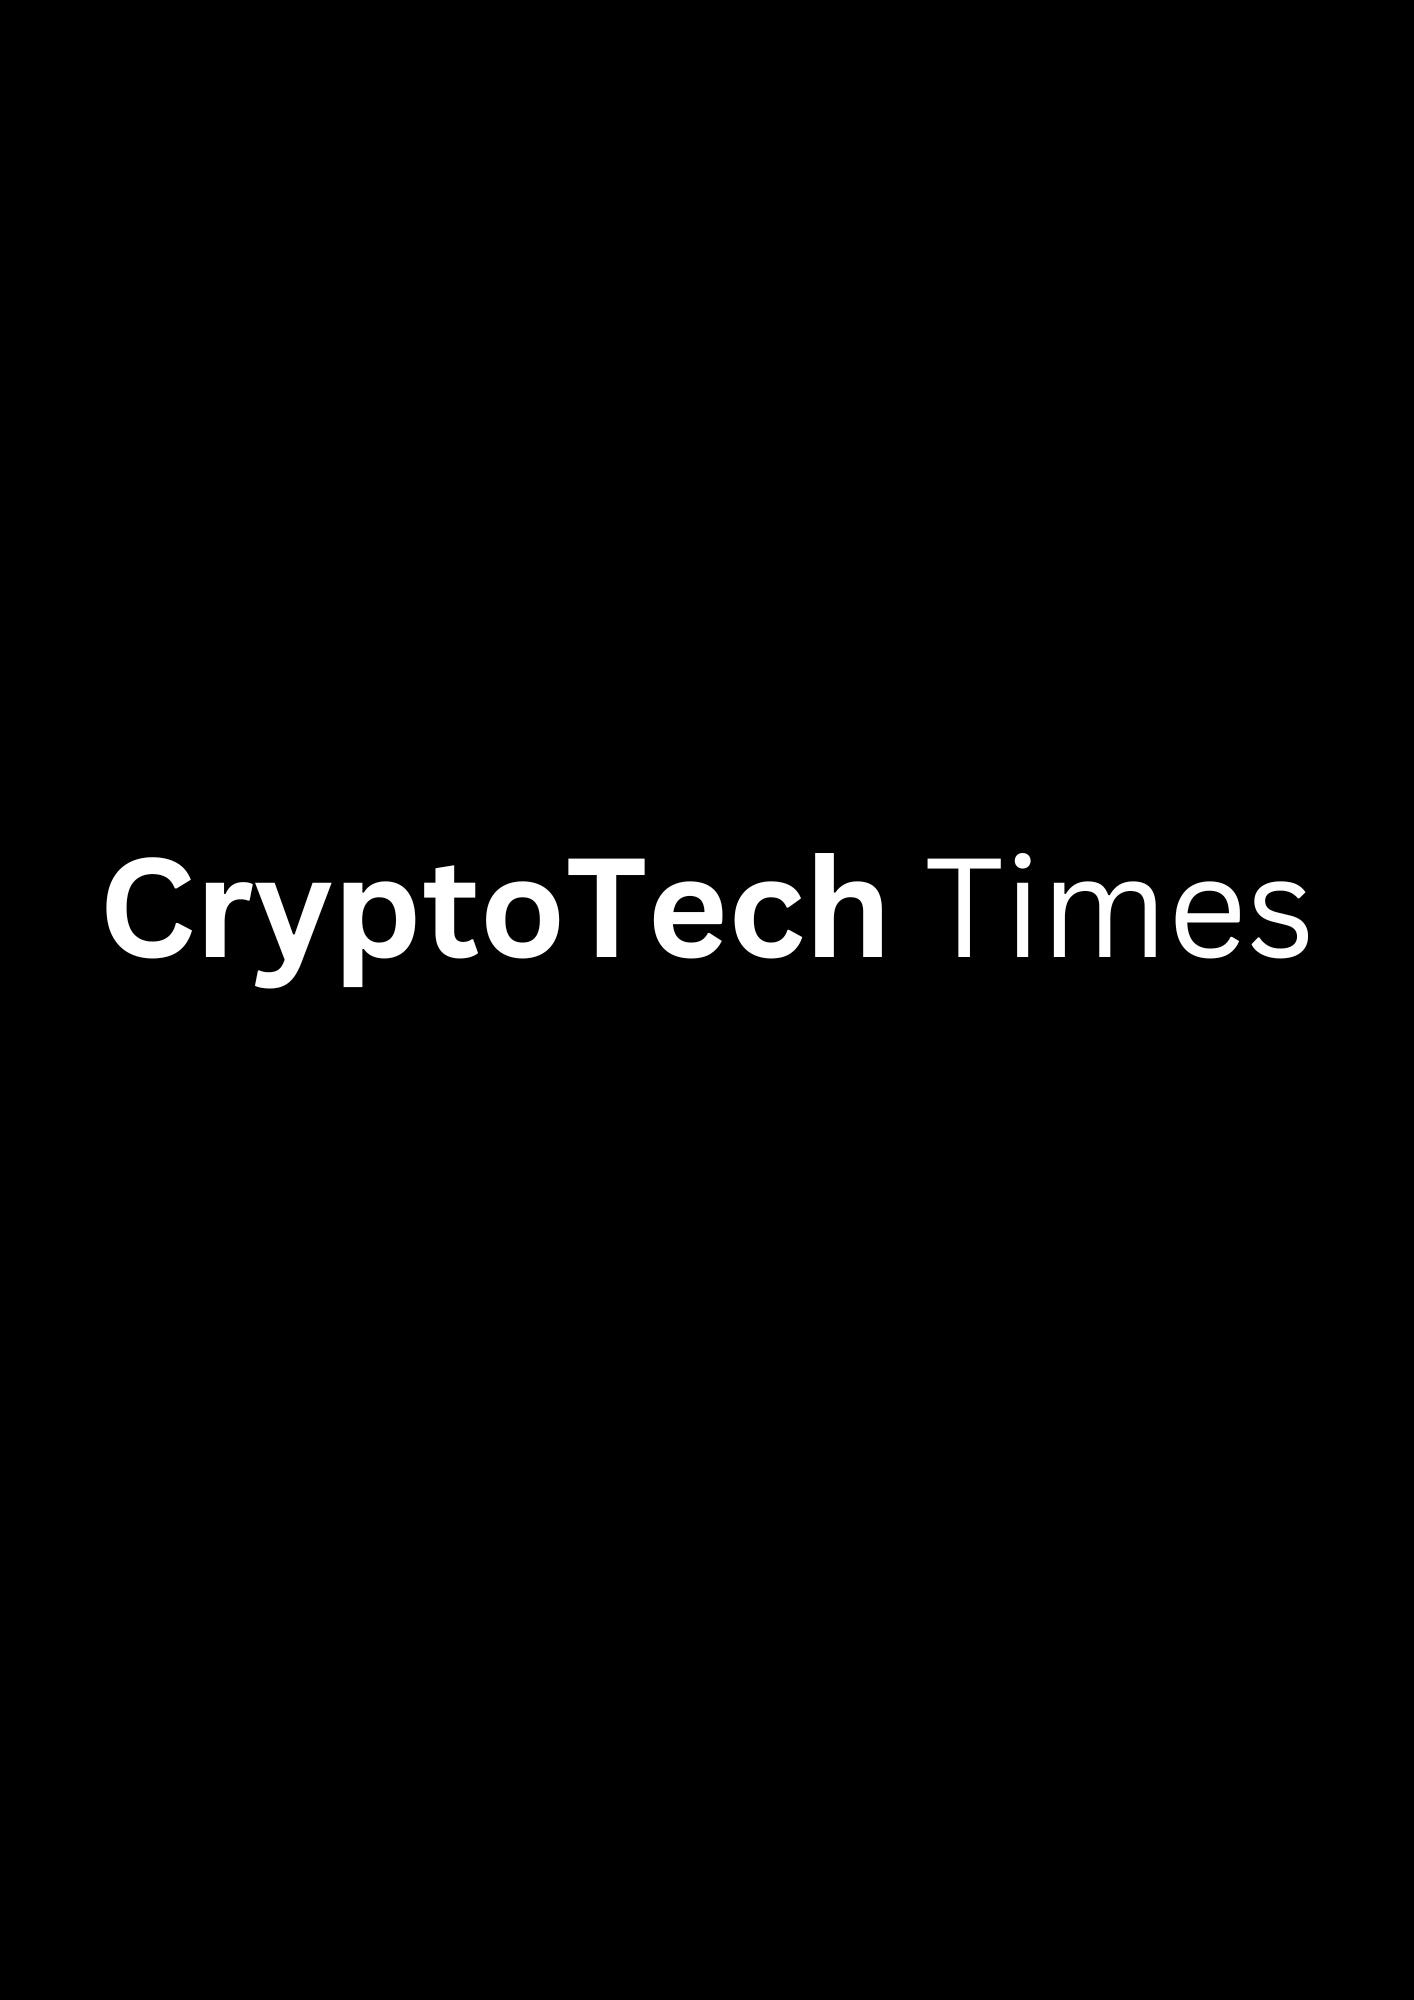 CryptoTech Times  Best Digital Publication in India - Andhra Pradesh - Hyderabad ID1522232